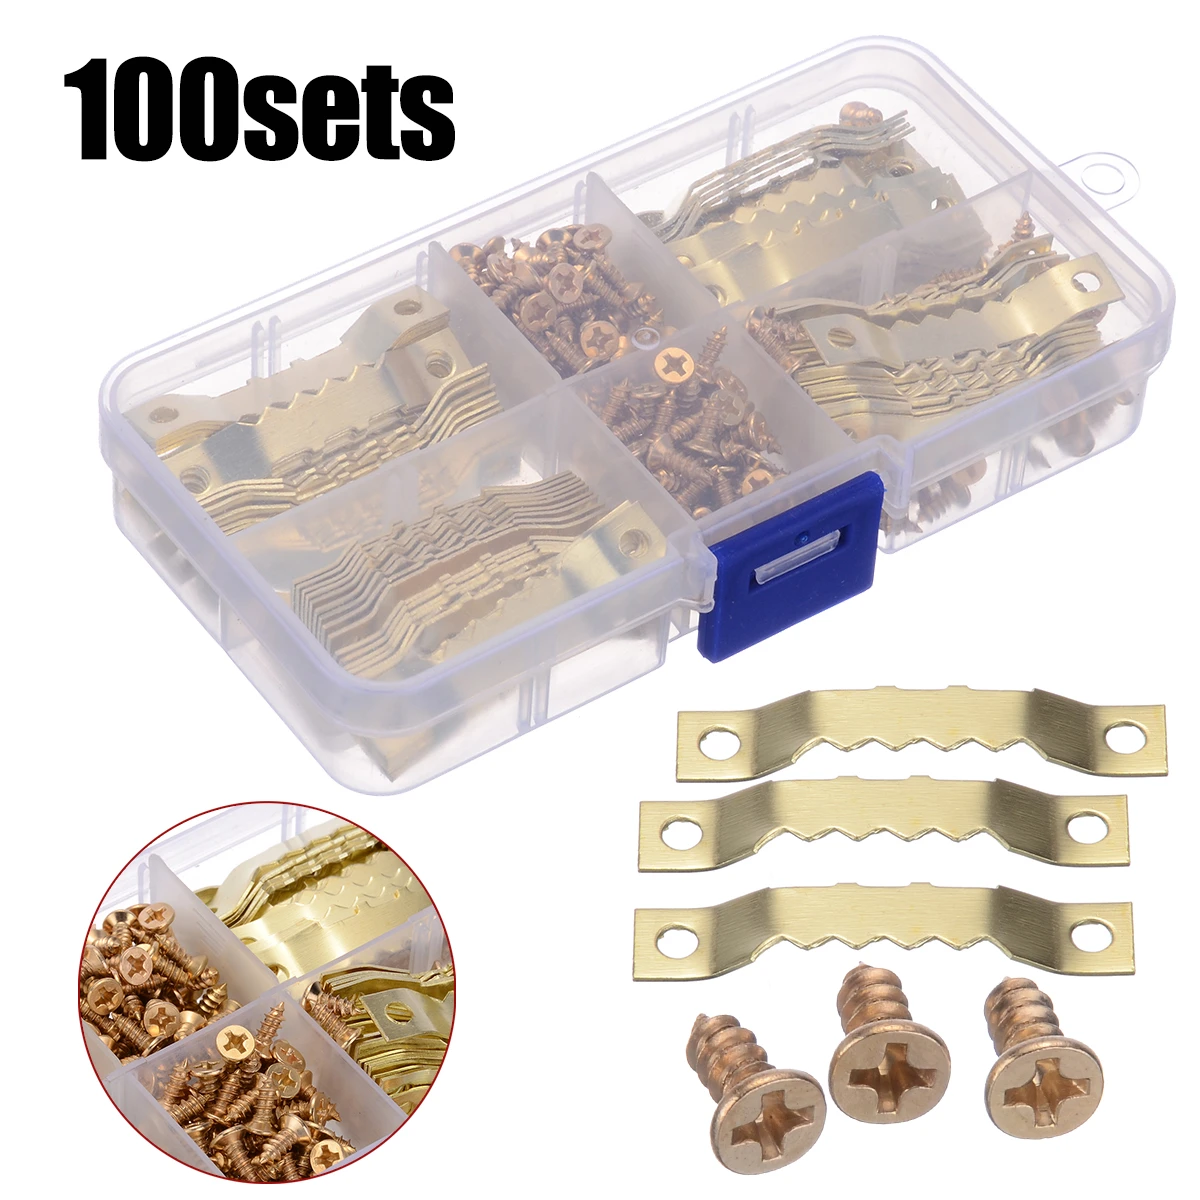 100 Sets Gold Saw Tooth Hangers Canvas Picture Frame Hanging Hooks With Screws Sawtooth Hangers 45*8mm DIY Hardware Tools